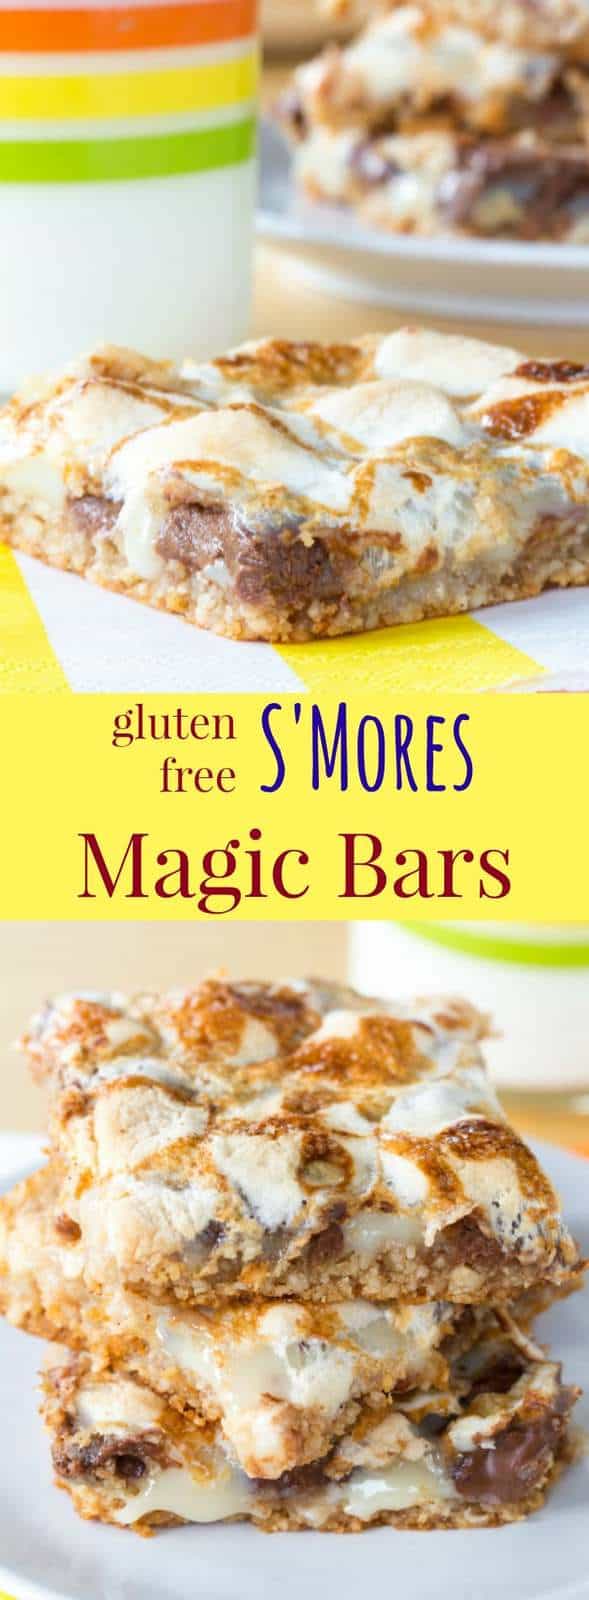 Gluten Free S'Mores Magic Bars - combine two favorite dessert recipes into one gooey treat filled with chocolate and marshmallows. And the mock flourless graham cracker crust is so easy! | cupcakesandkalechips.com